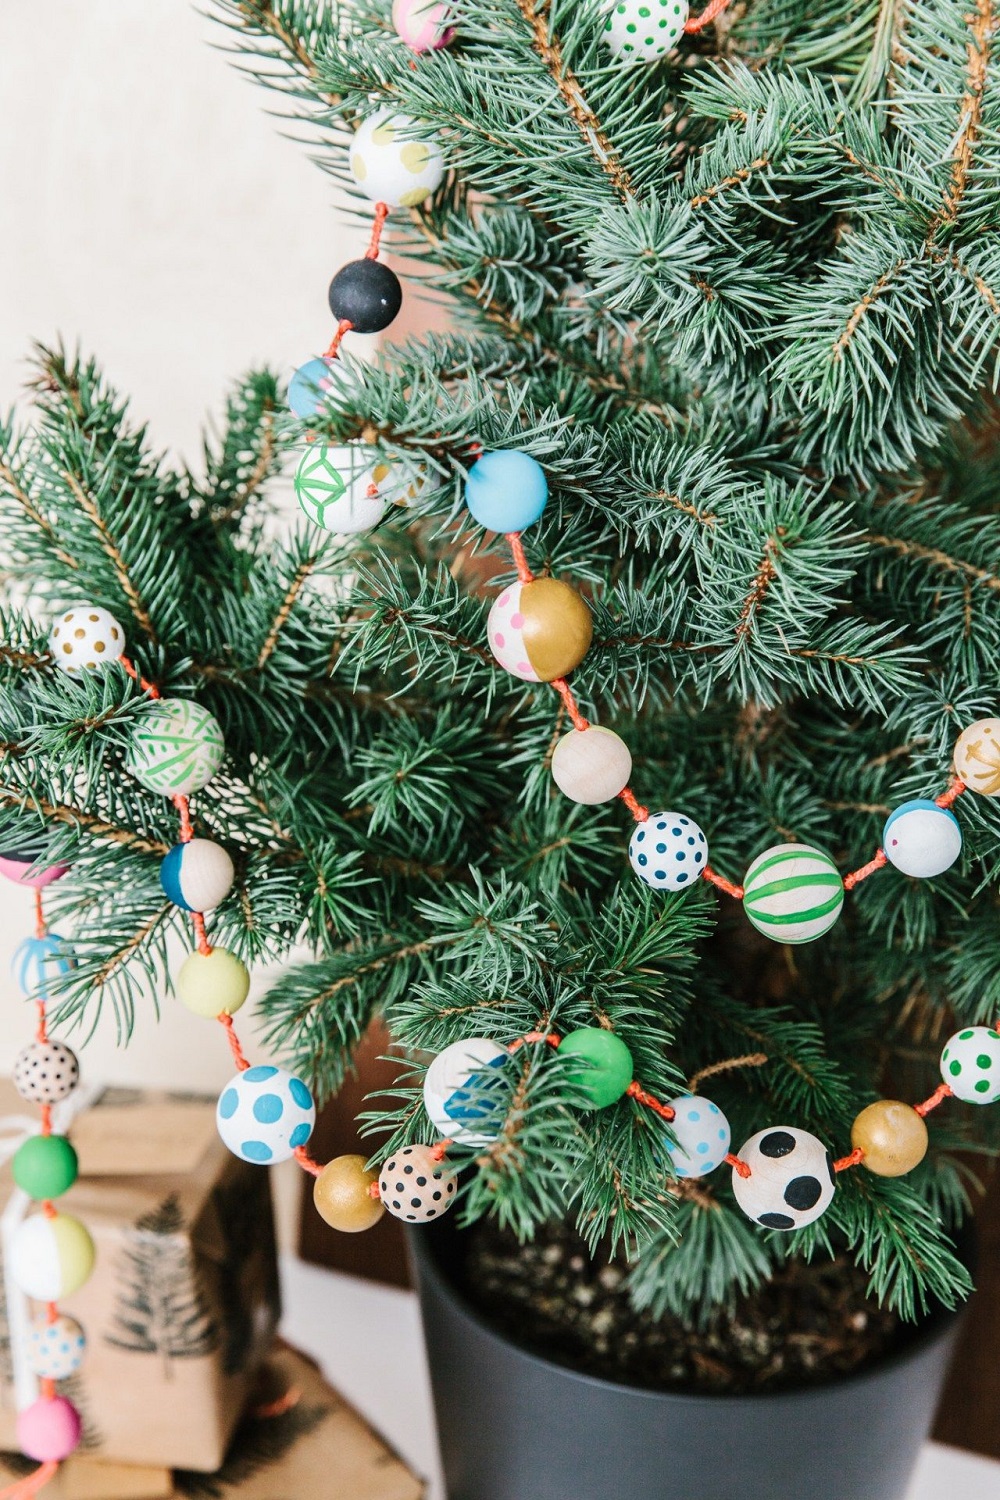 t4-21 Modern Christmas decorations ideas that are heartwarming